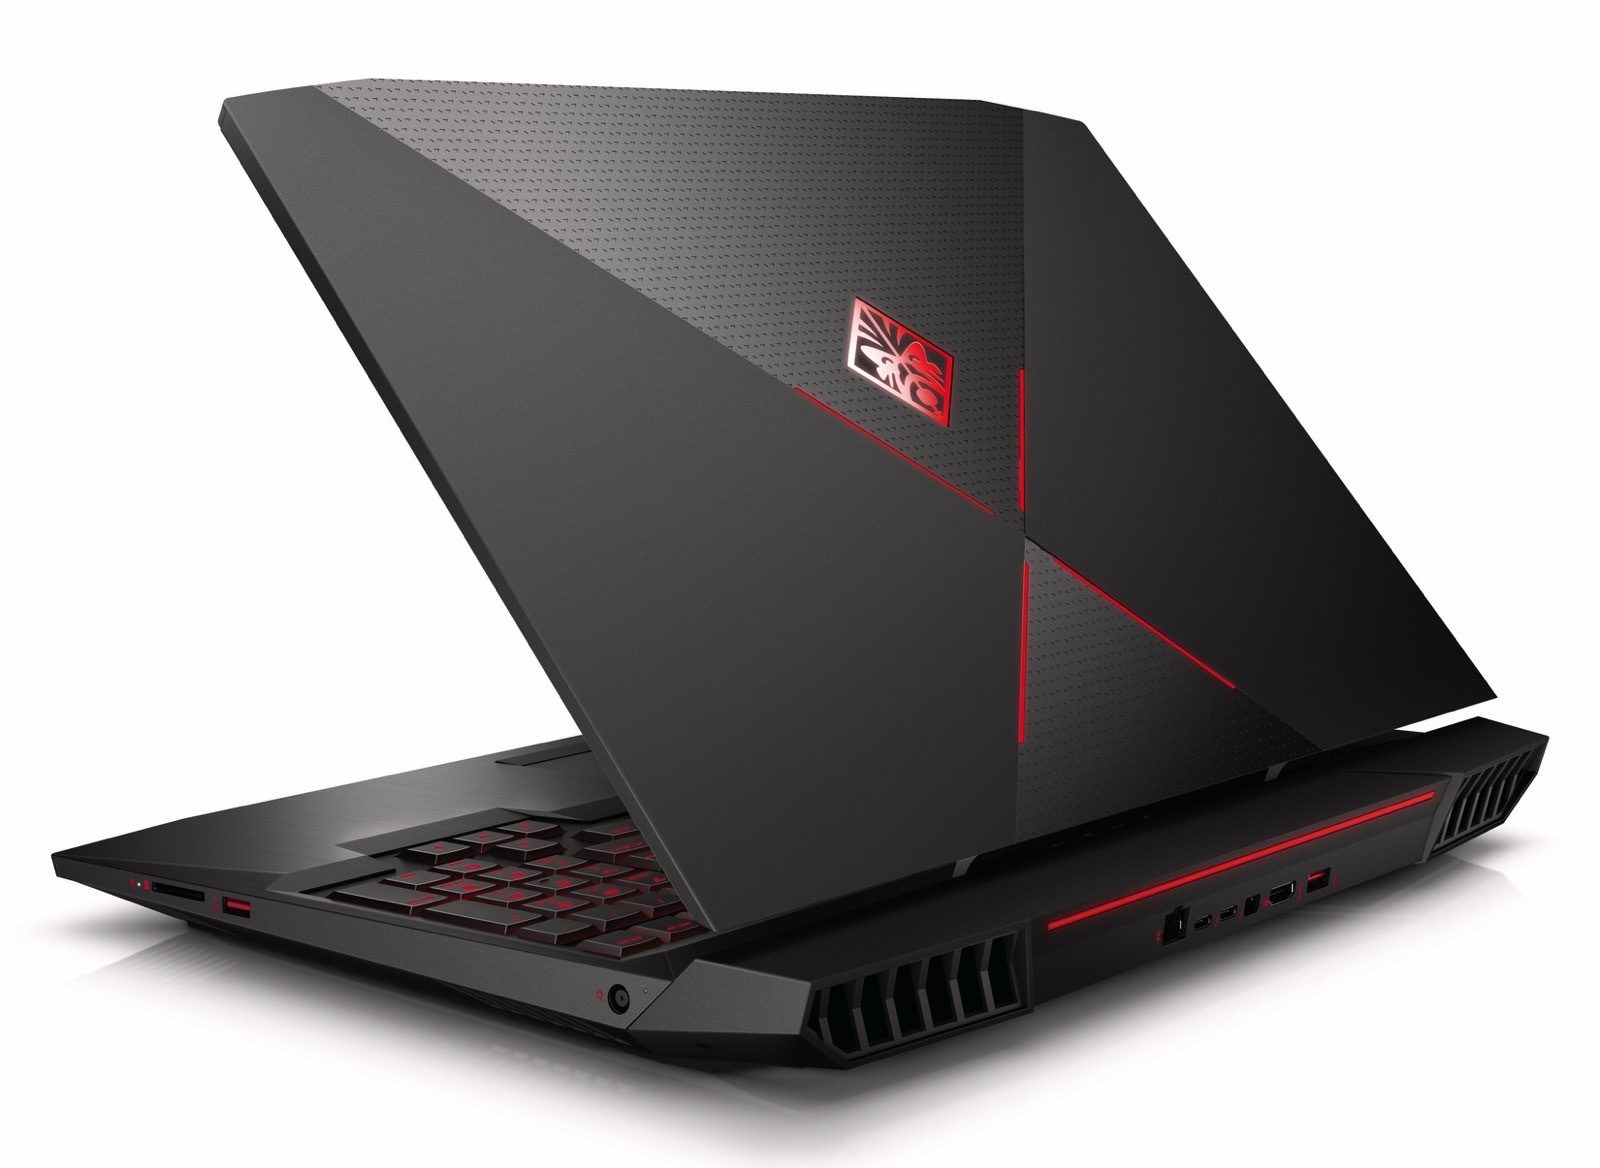 HP's New Omen X Laptop Is A 17inch Gaming Powerhouse With RGB